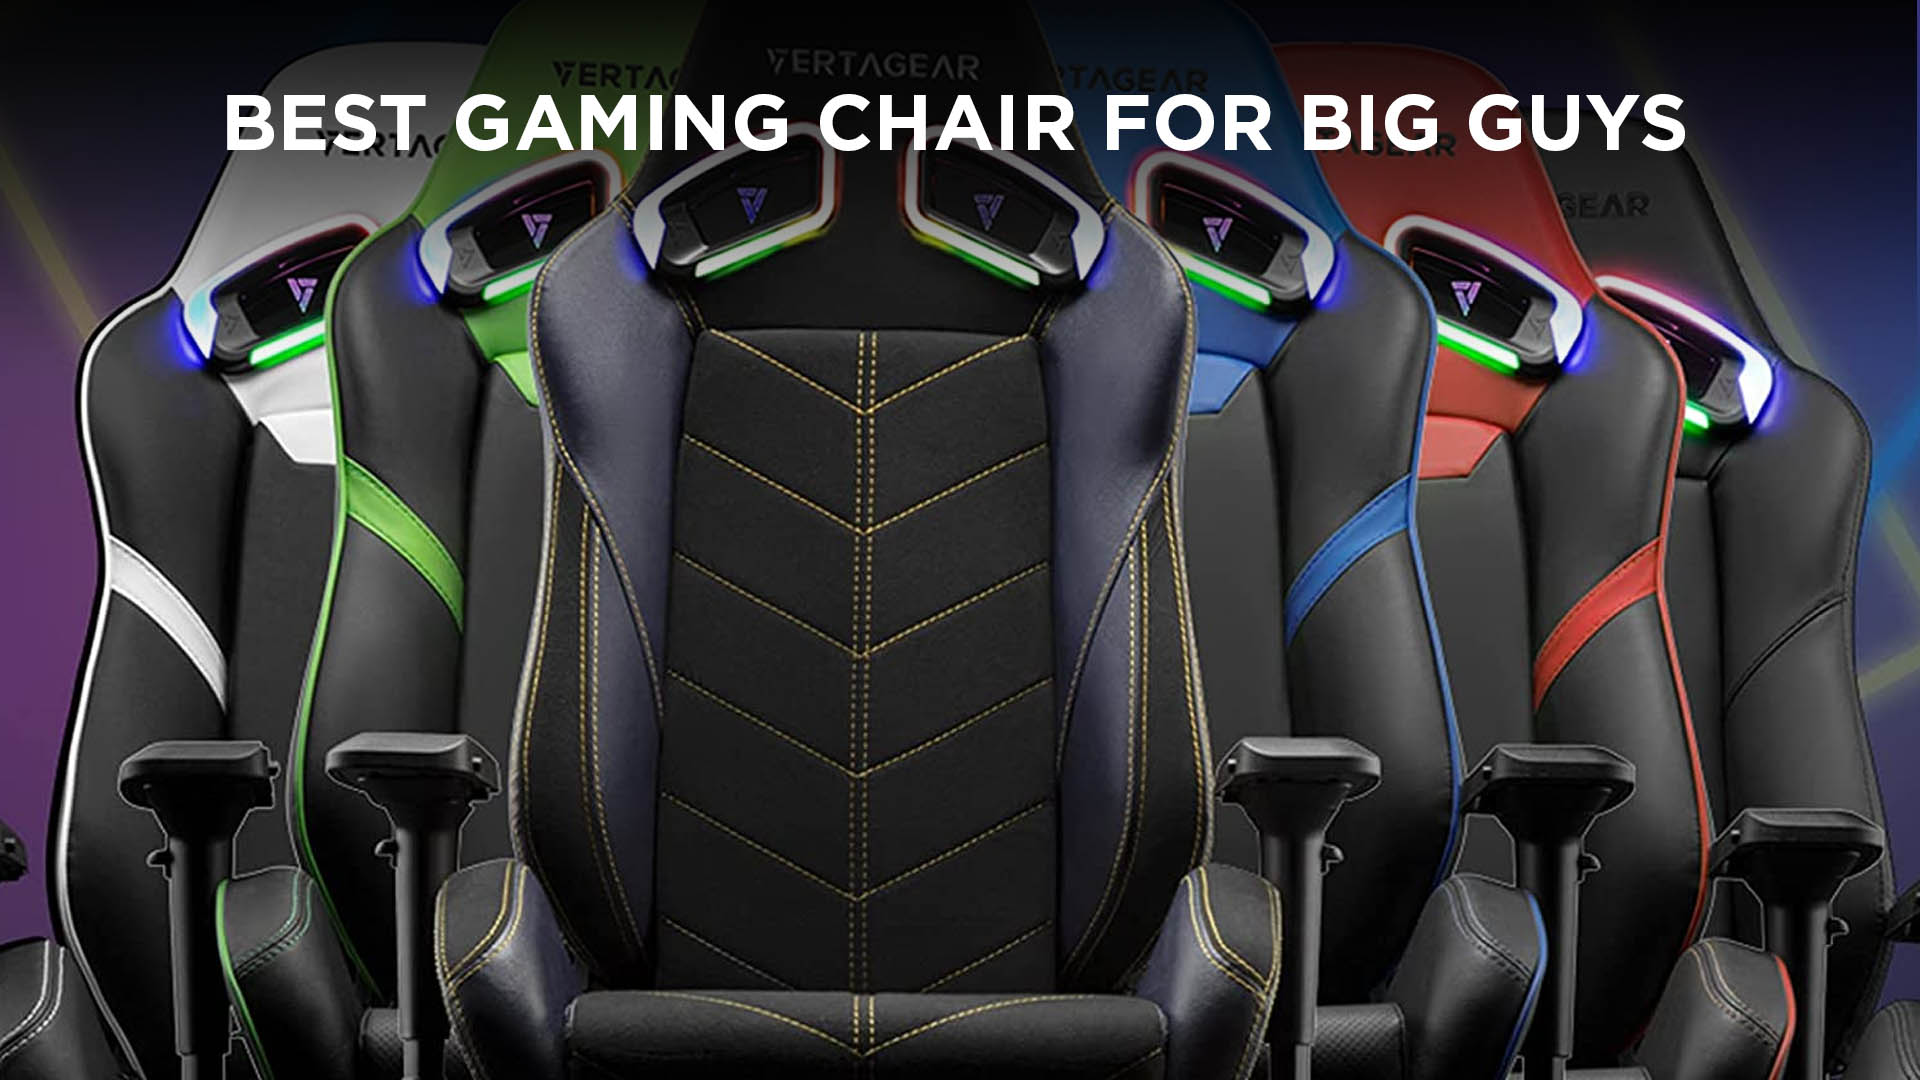 What Is the Best Gaming Chair for Big Guys - Reviews